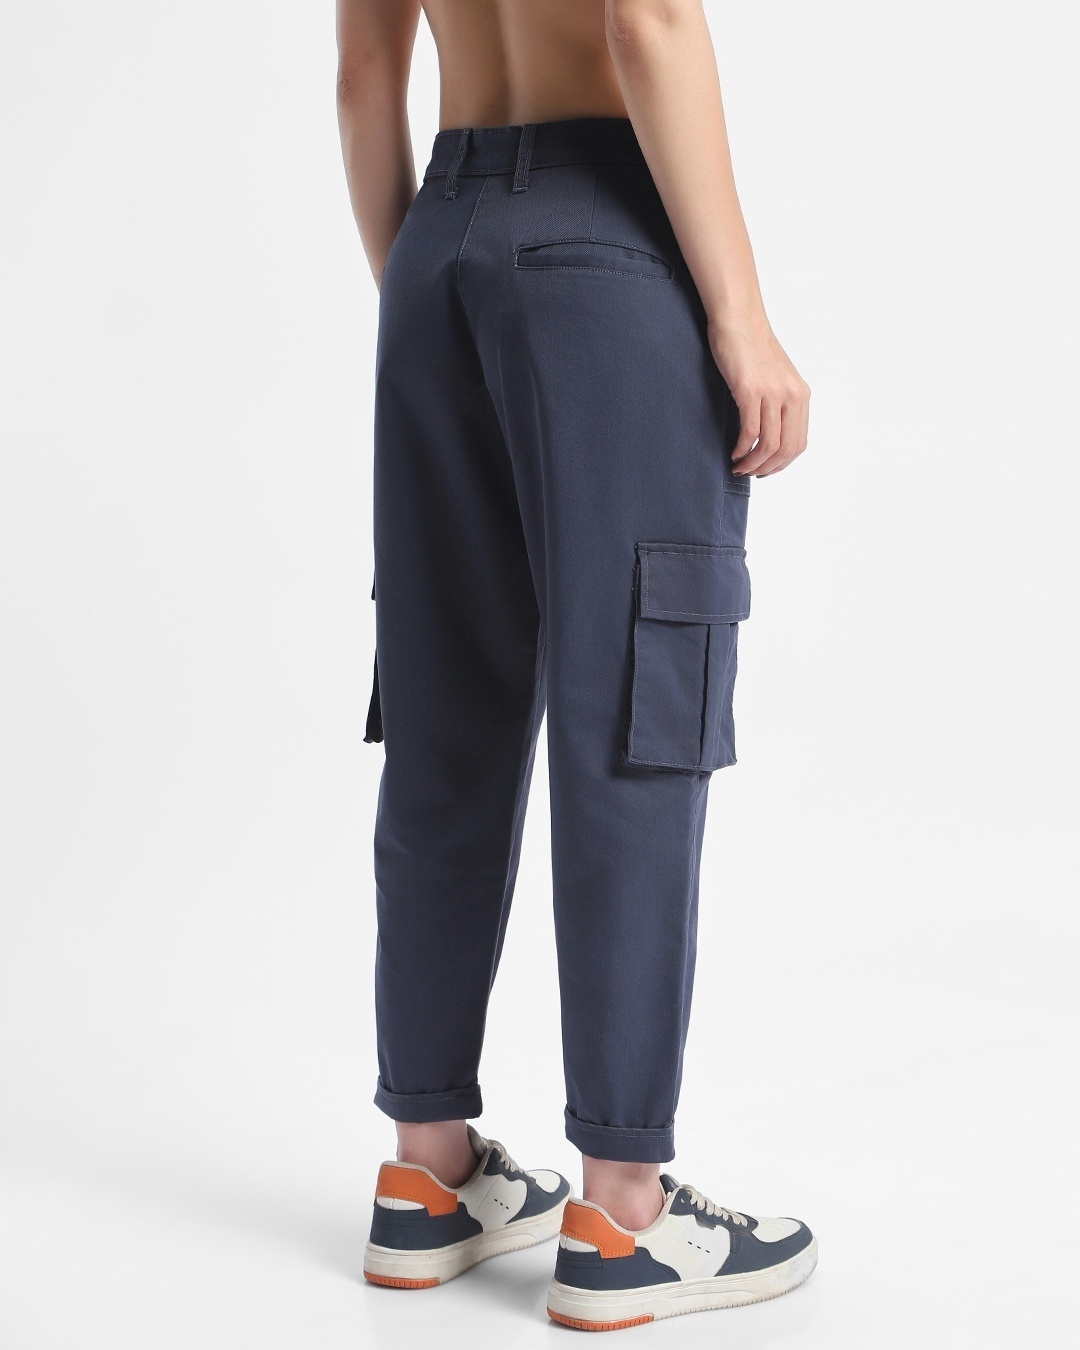 Women's Blue Tapered Cargo Pants to ace skater girl style